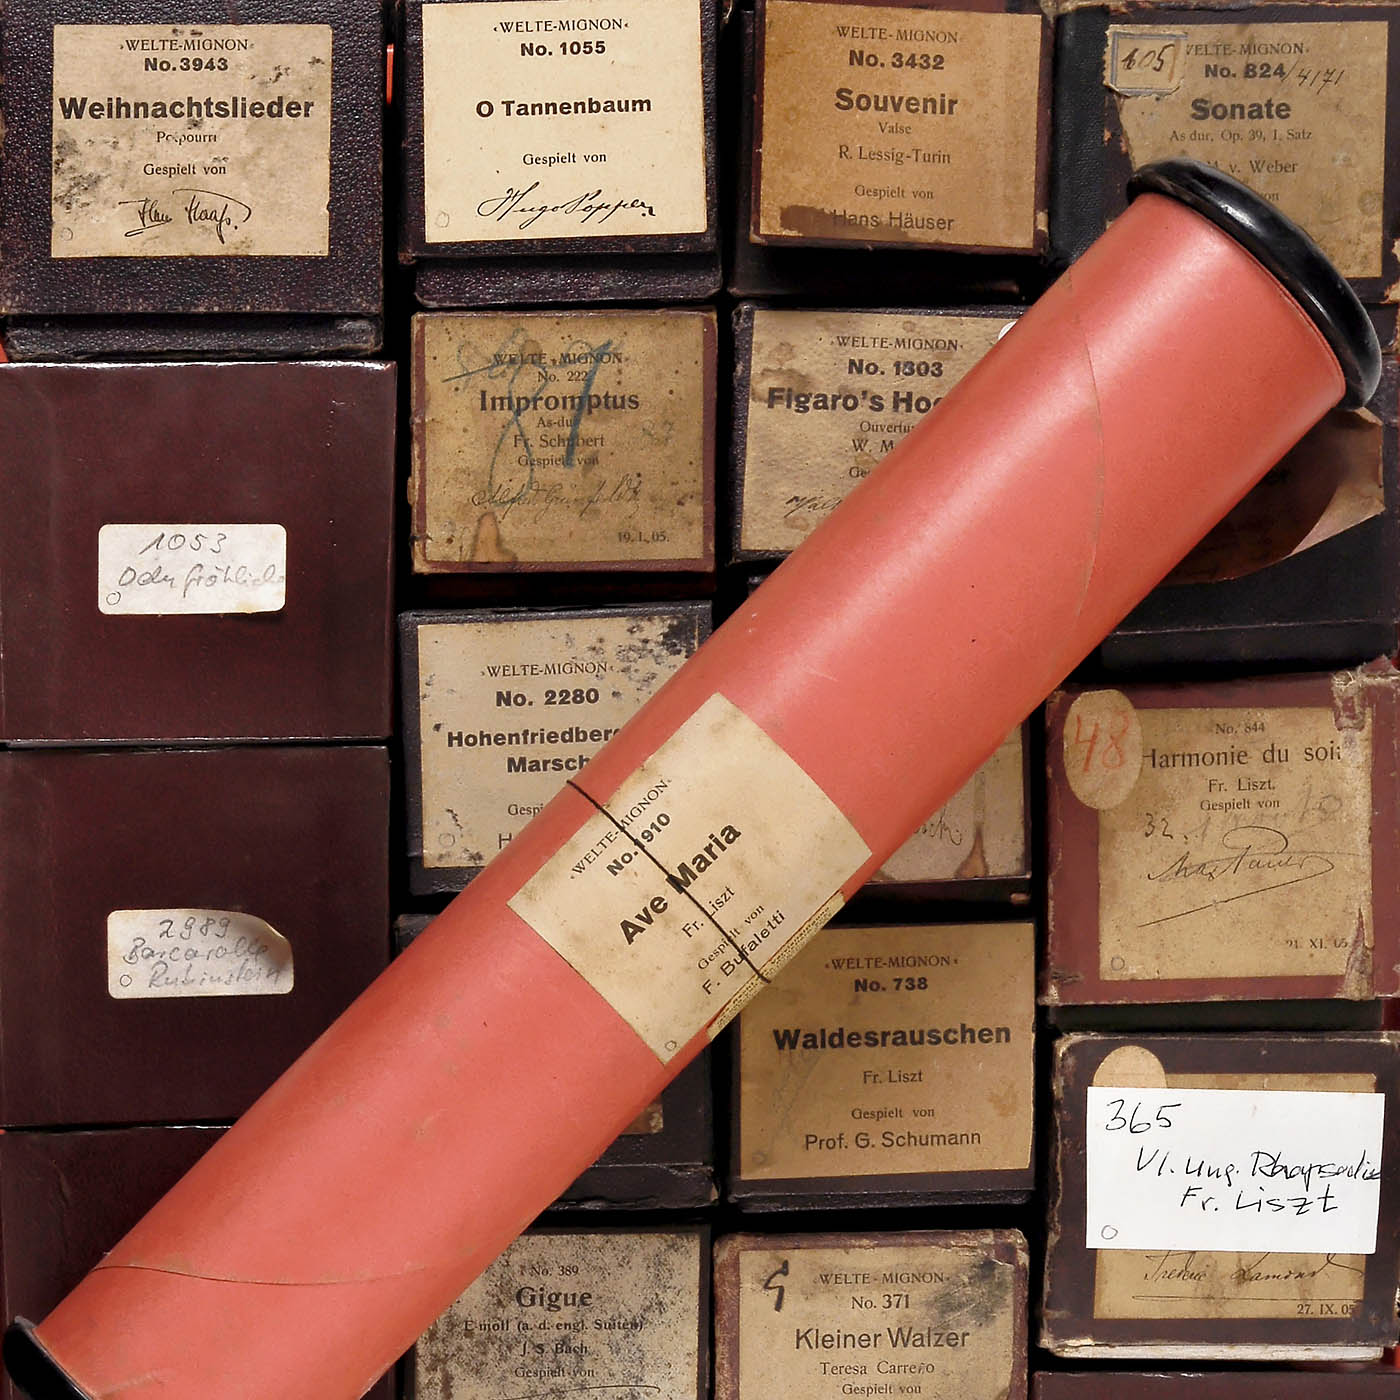 54 Welte-Mignon Reproducing Piano Rolls (T 100 -Red), 1905 onwards - Image 7 of 8